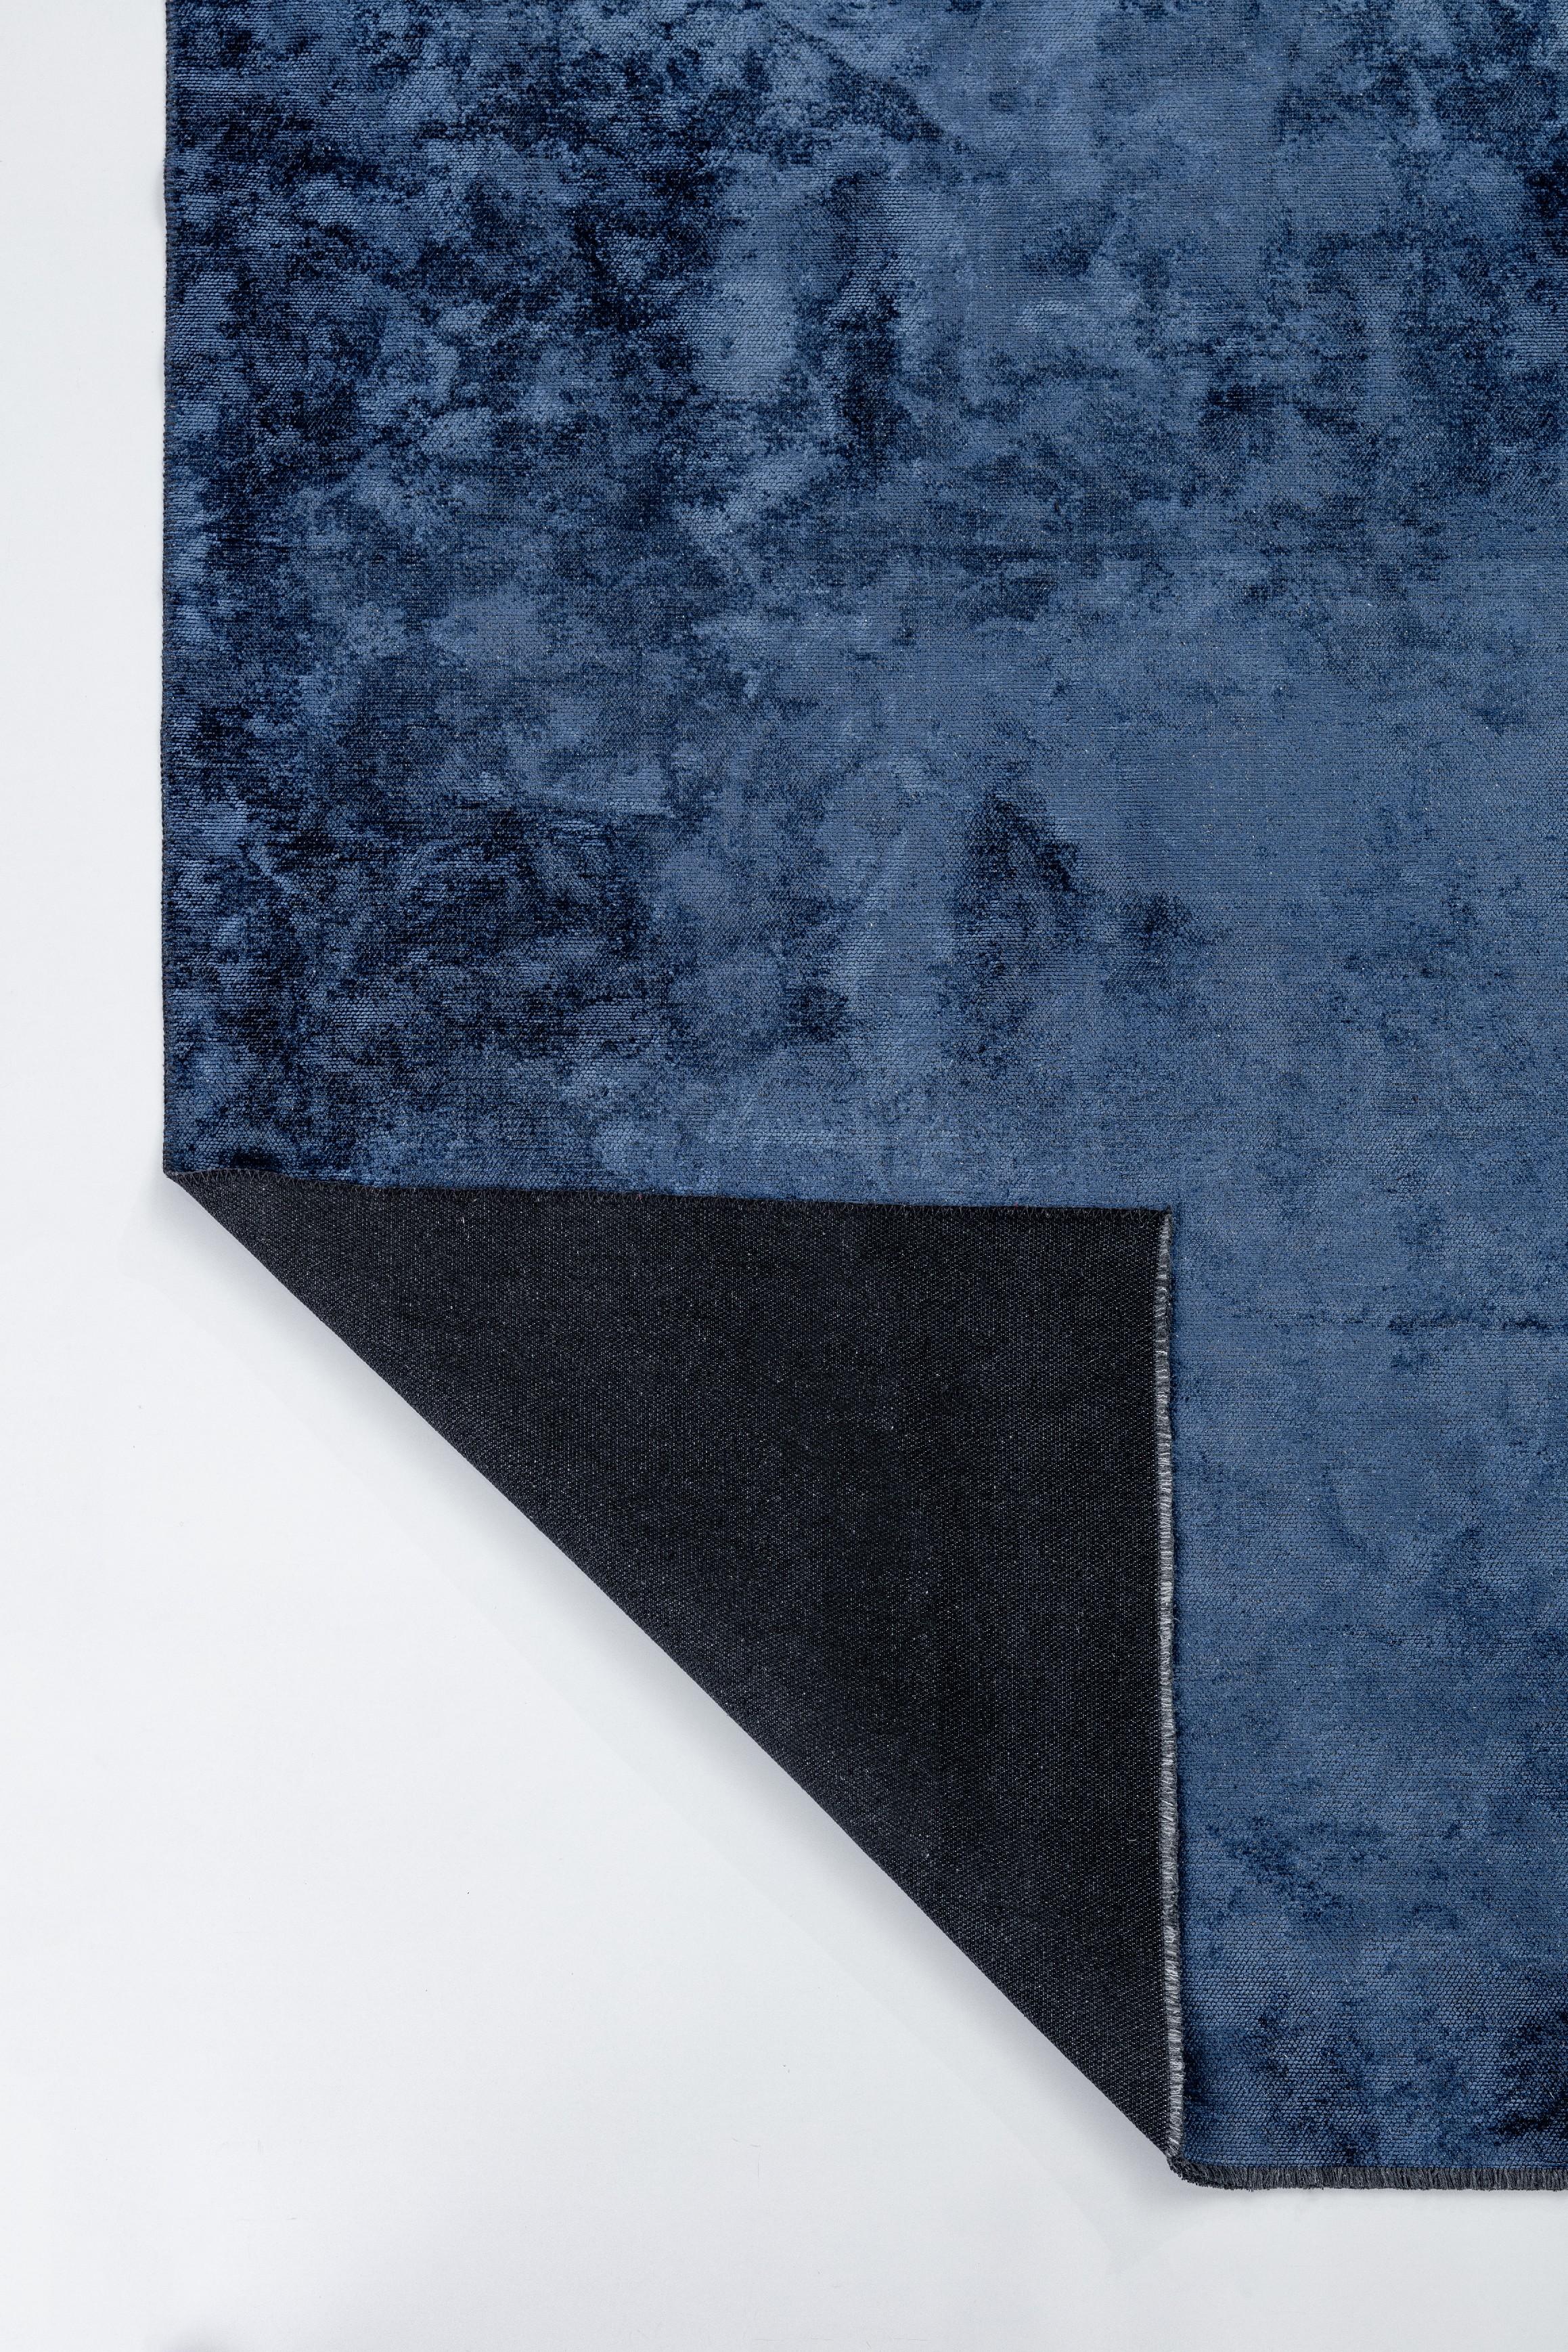 For Sale:  (Blue) Modern Solid Color Luxury Area Rug 7